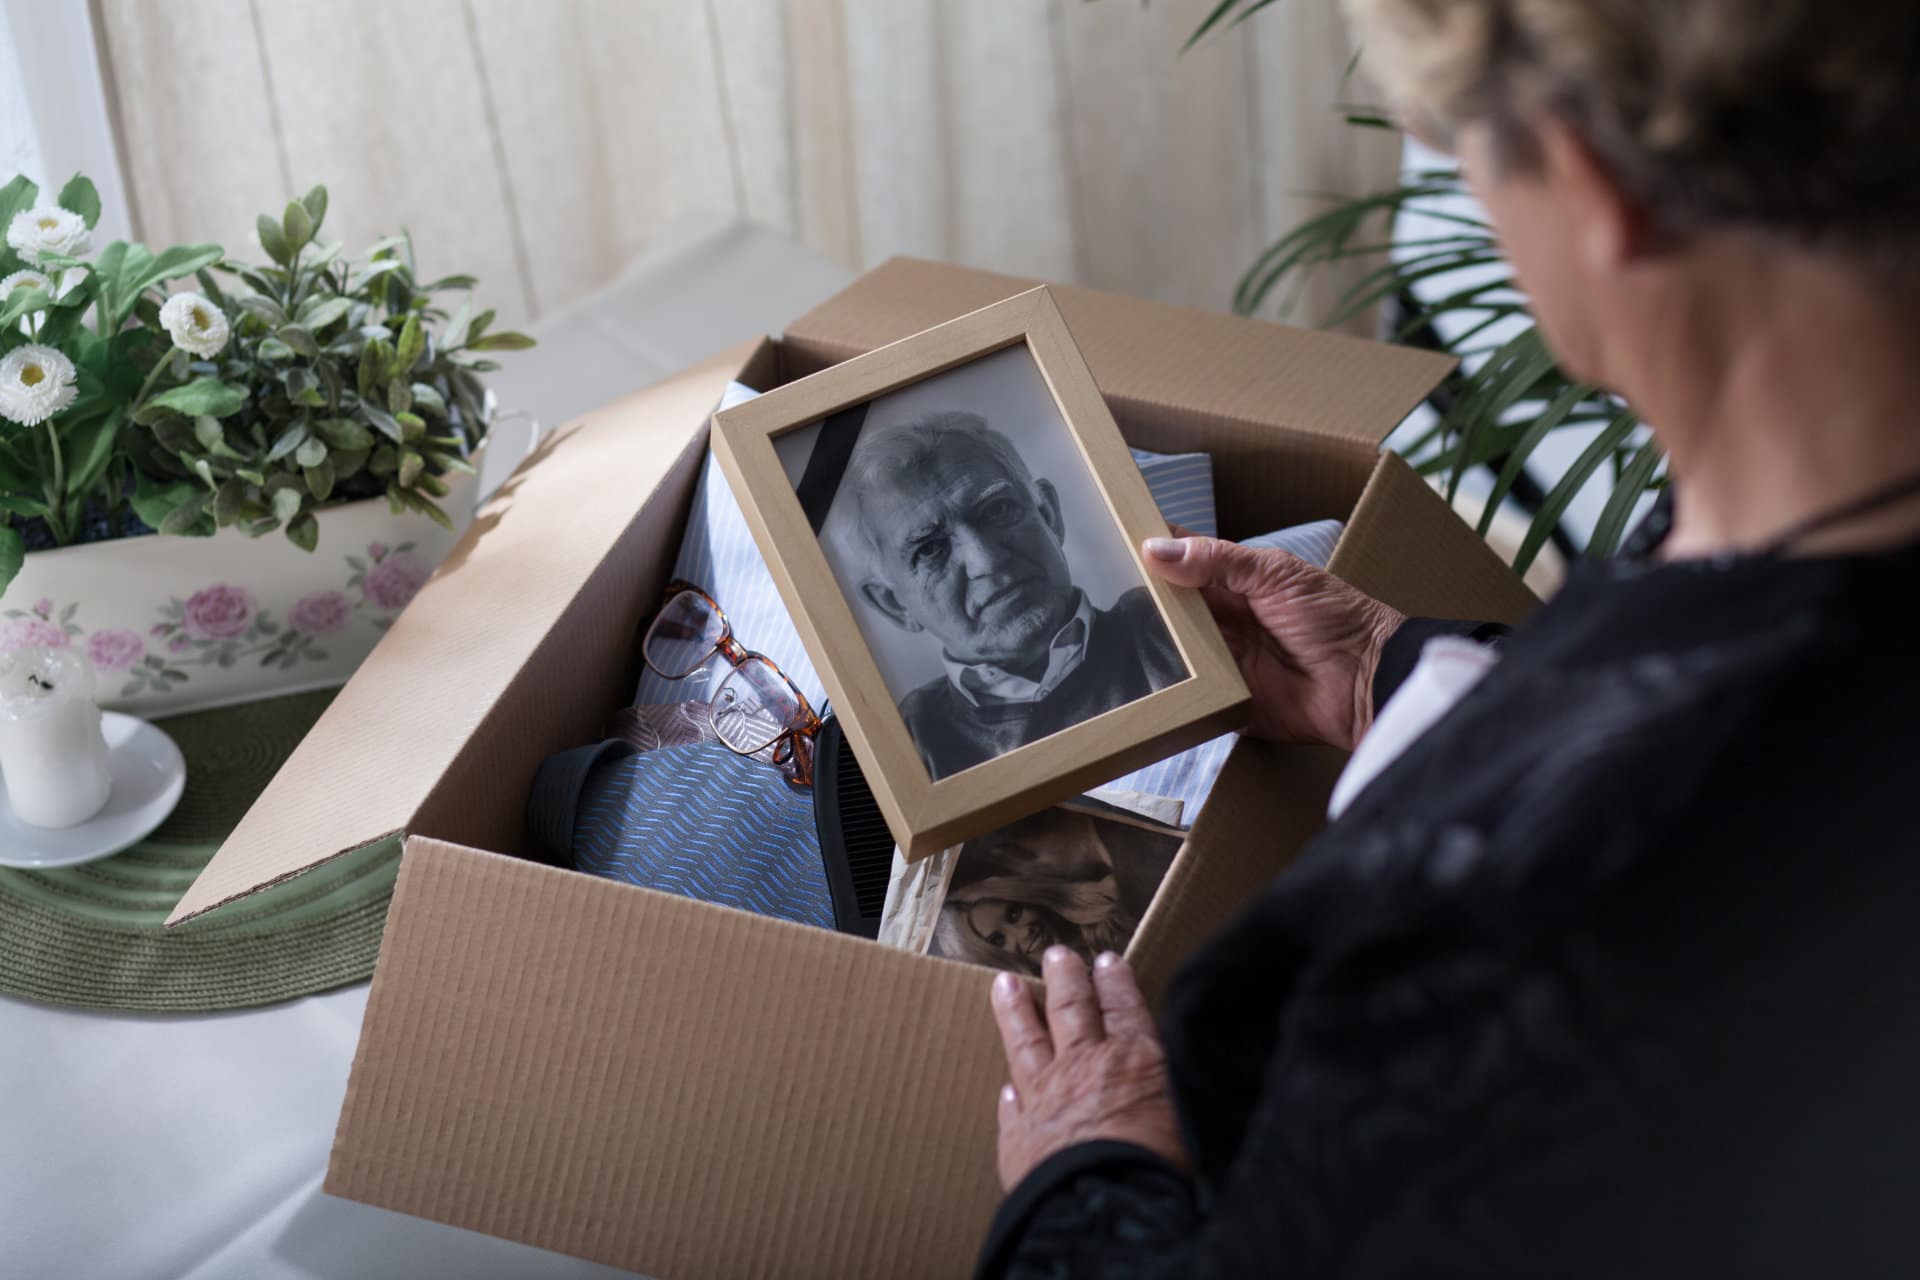 Woman is packing up belongings and memories of her deceased husband while looking a portrait photo of him